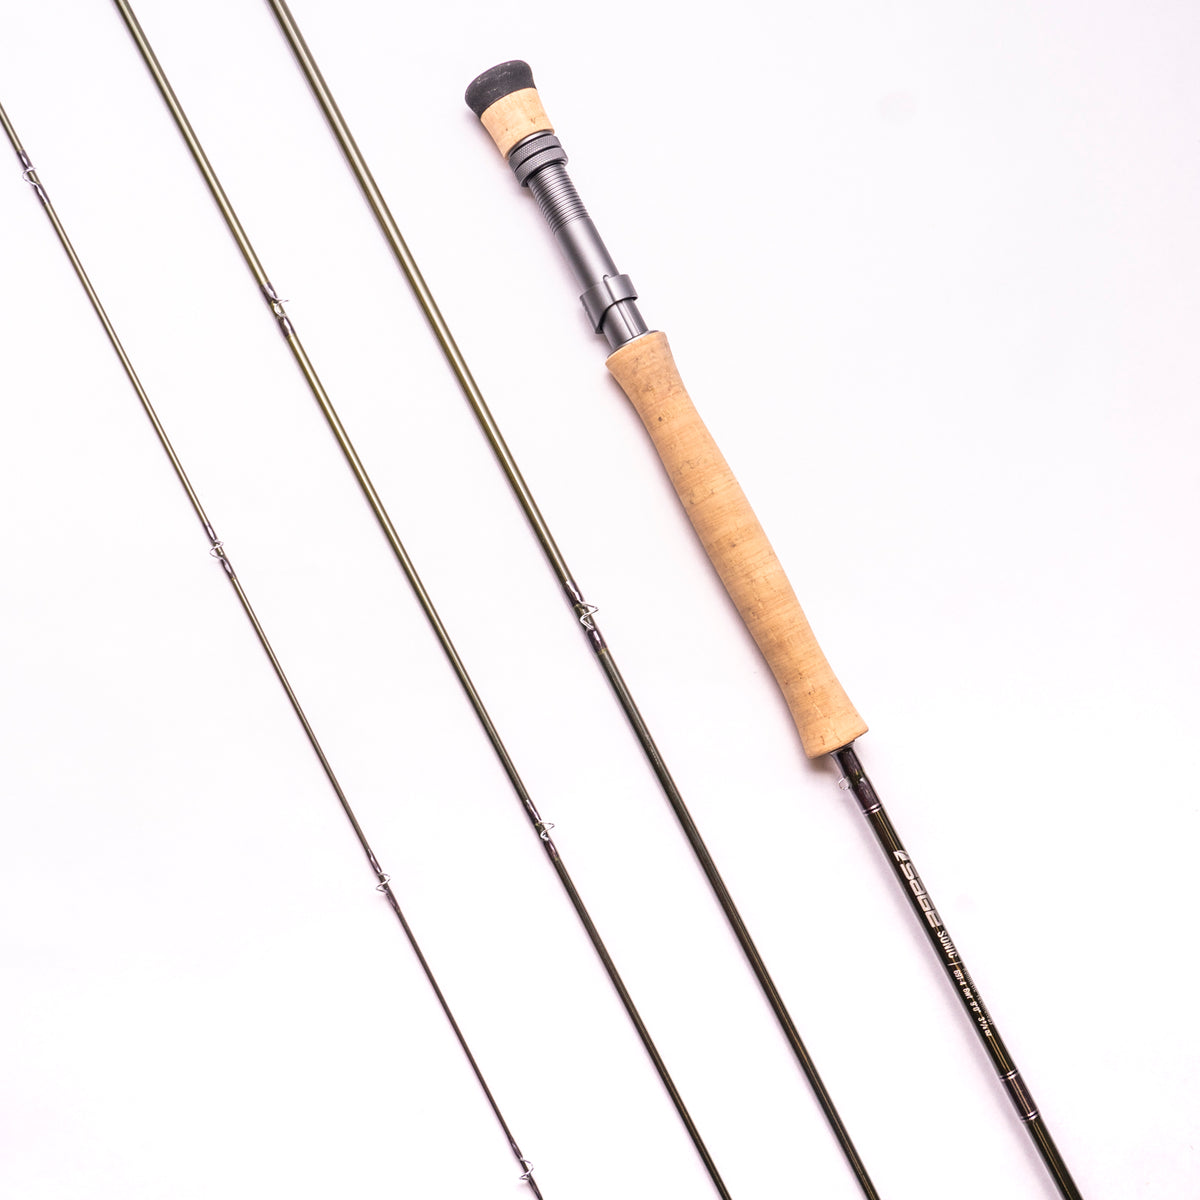 Sage Sonic 6 Piece DH Travel Rod – Guide Flyfishing